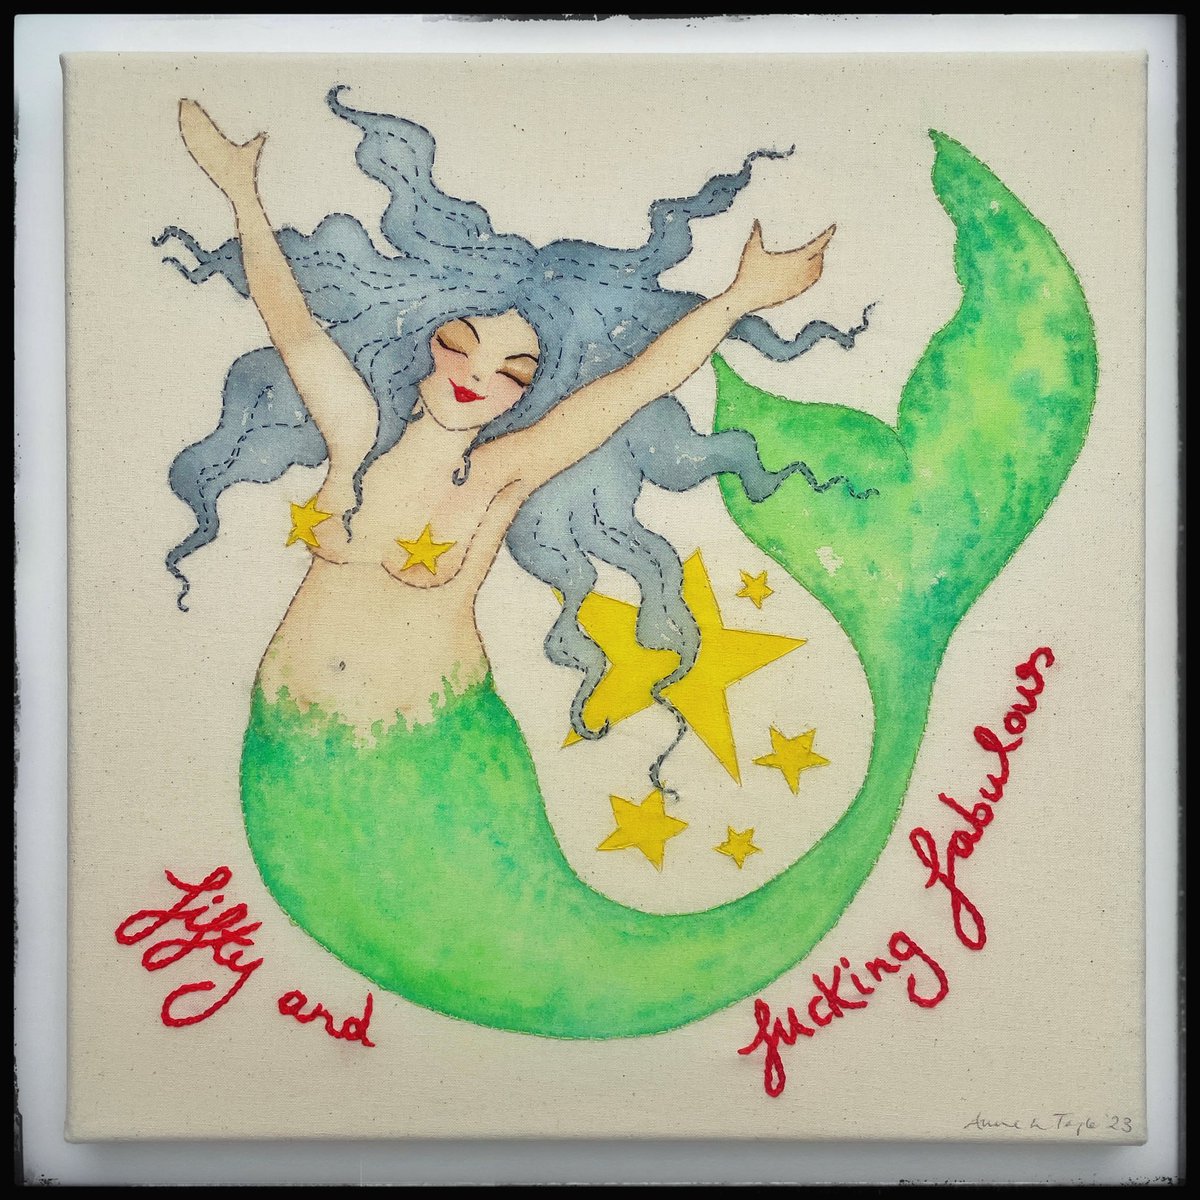 A commission I snuck in when avoiding hexagons. Has since been given to the birthday girl who apparently loves it. 
Not too big, not too small, just the right size, and not hexagonal. A really enjoyable job! 
#mermaid #fuckingfabulous